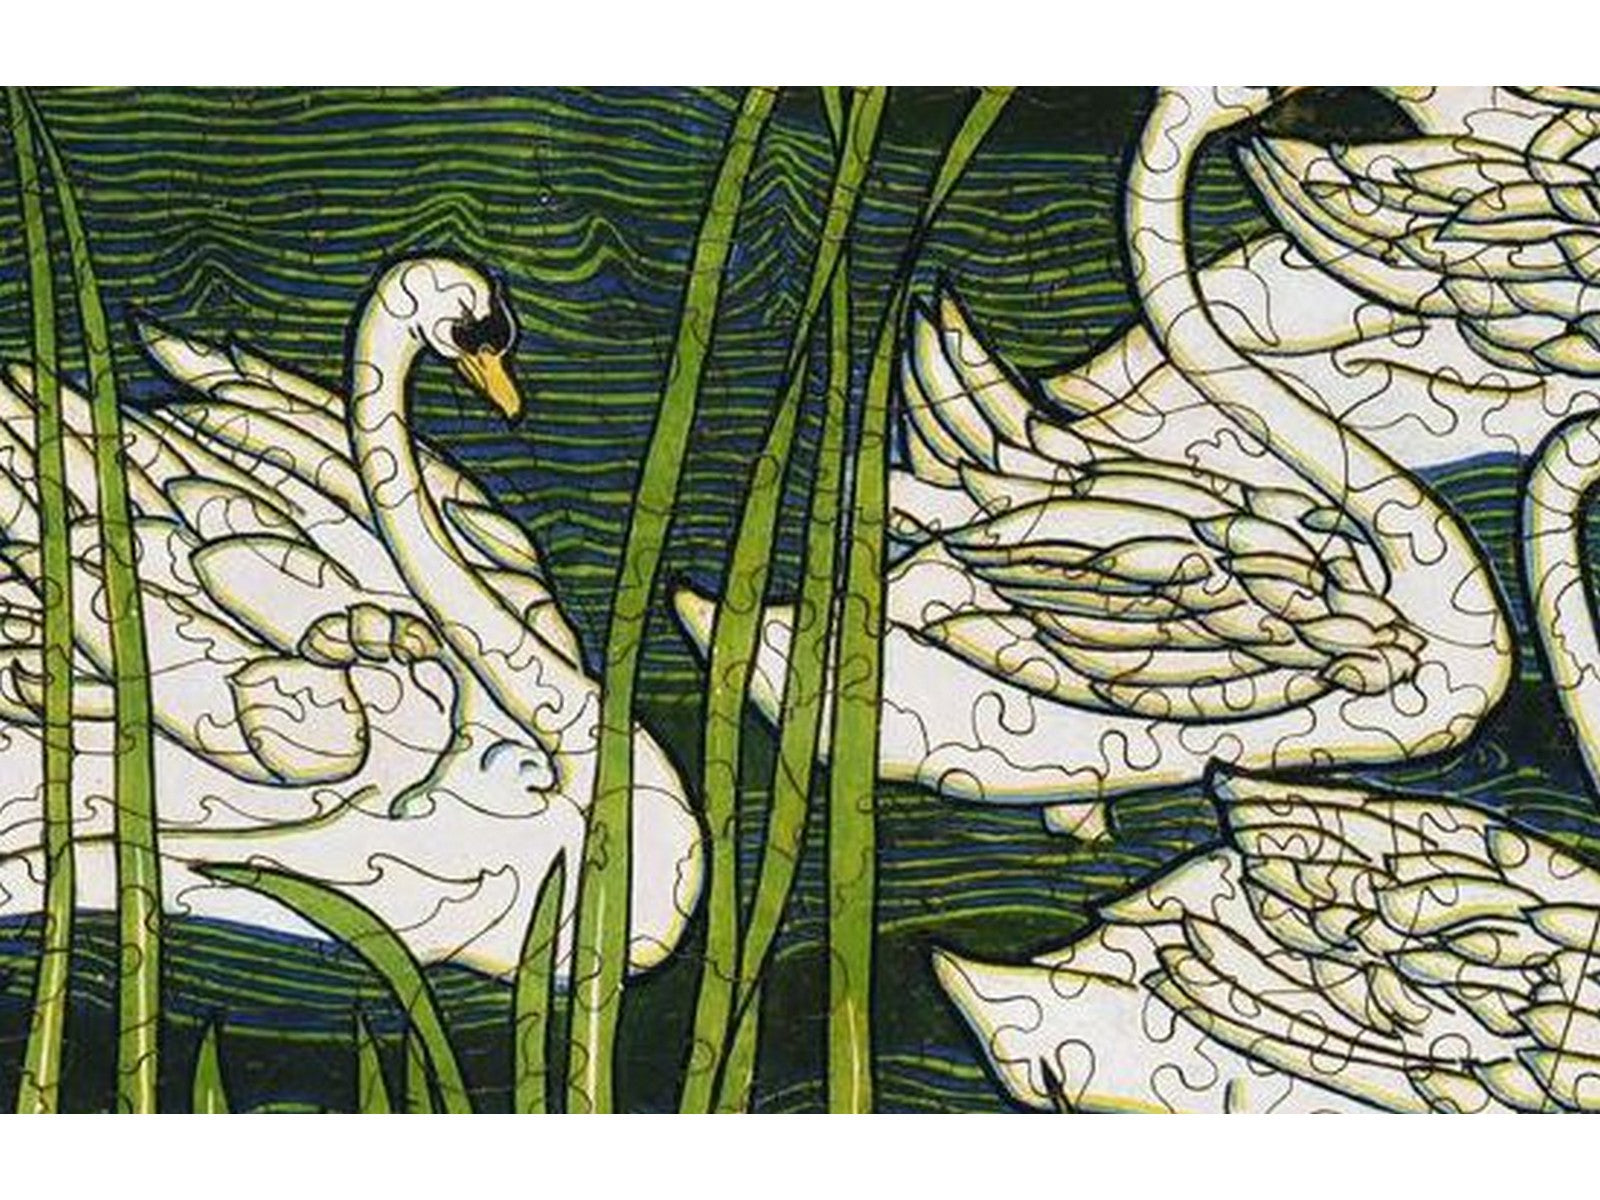 A closeup of the front of the puzzle, Swans, showing the detail in the pieces.